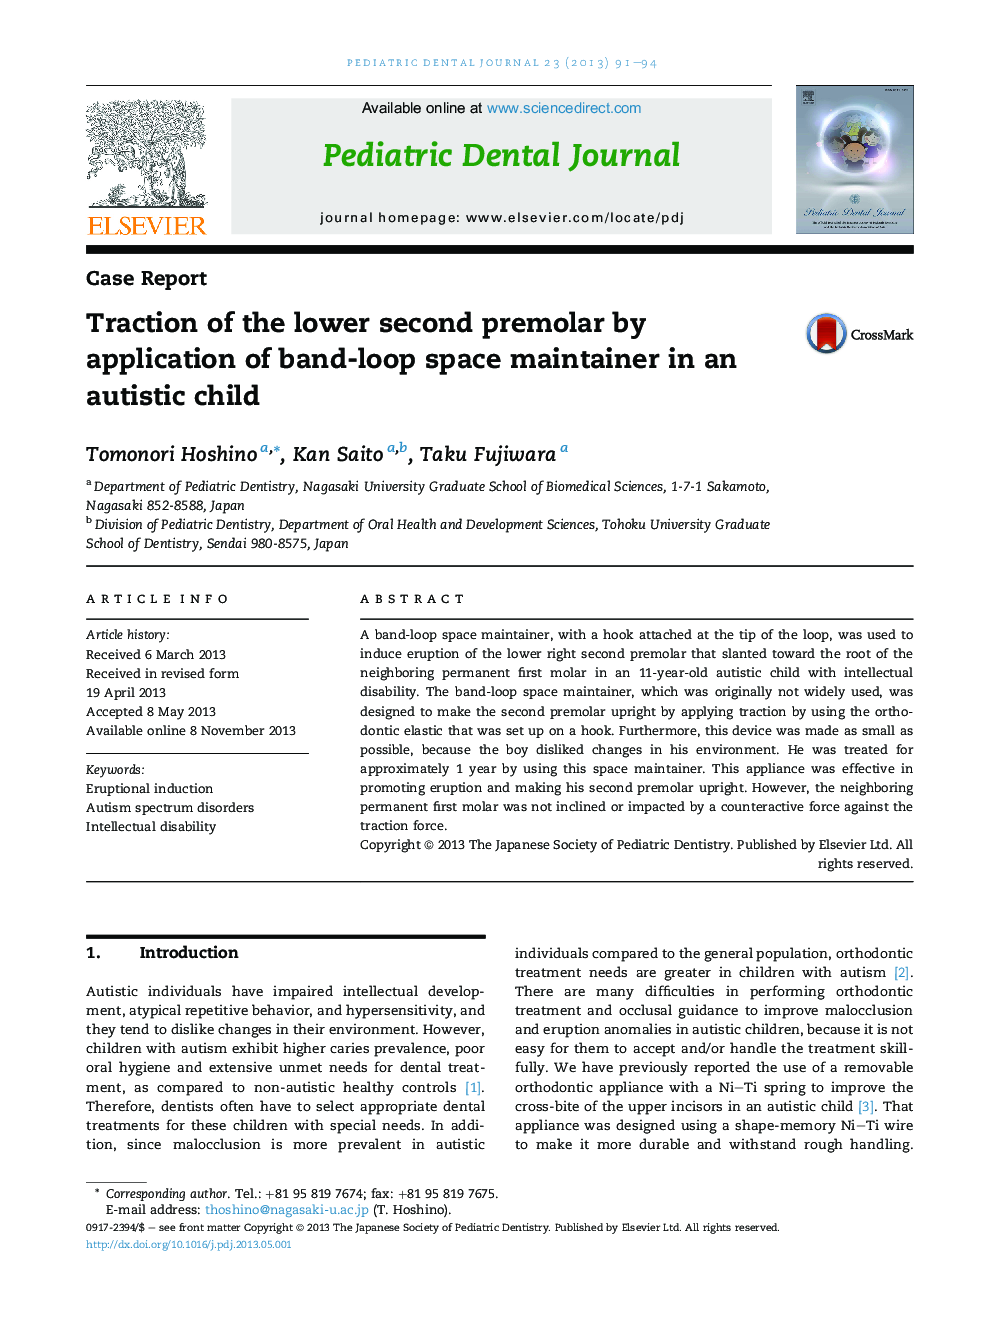 Traction of the lower second premolar by application of band-loop space maintainer in an autistic child